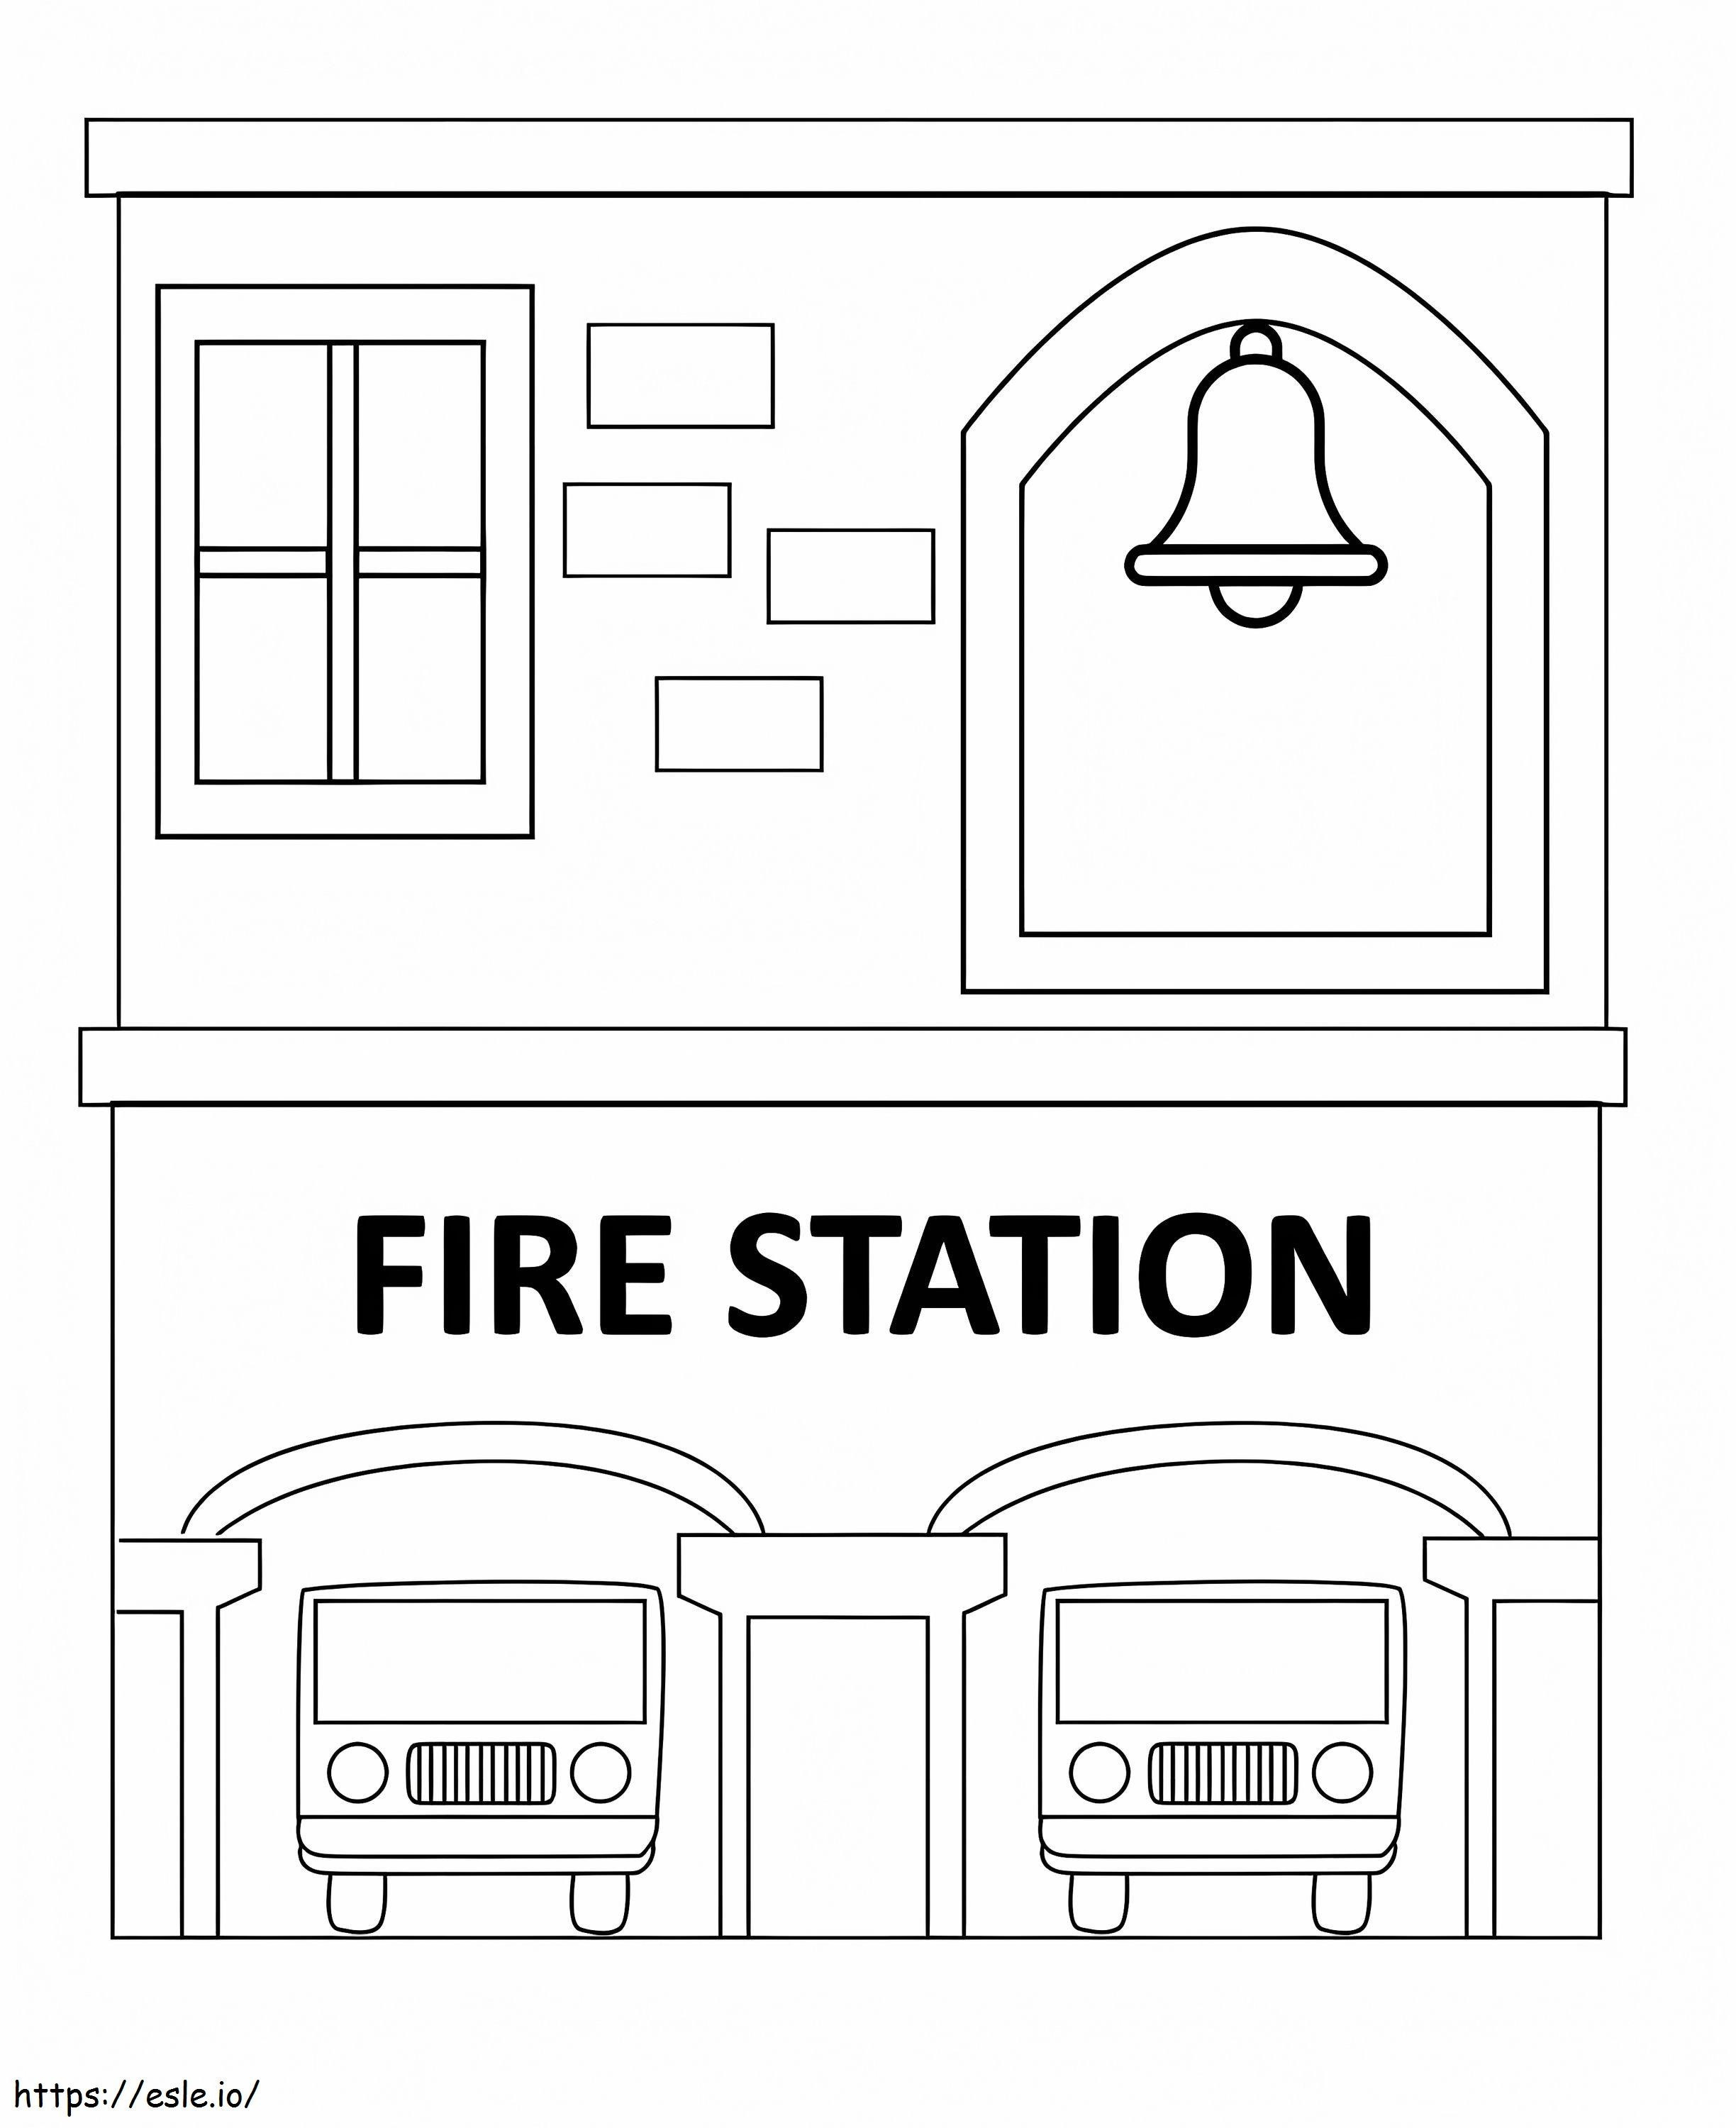 Easy Fire Station coloring page